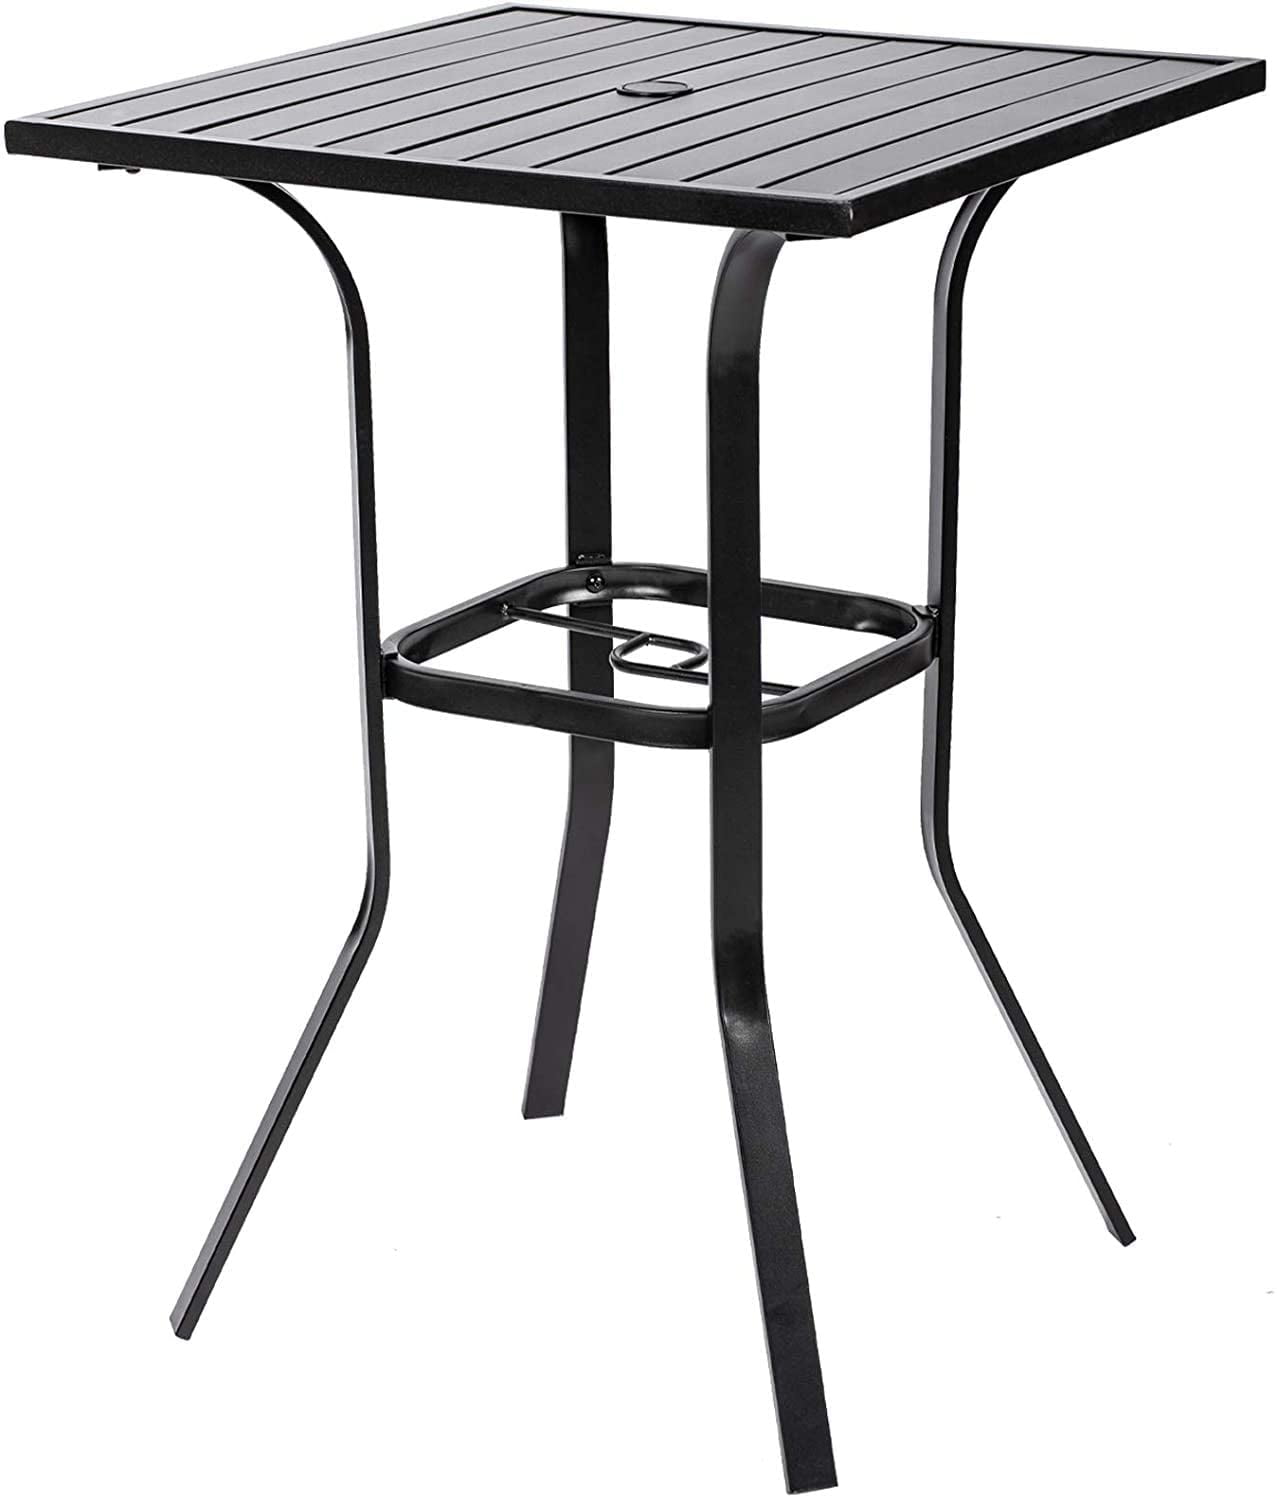 SOLAURA Furniture Outdoor Patio Table Steel Frame Coffee Table Square Side Table 